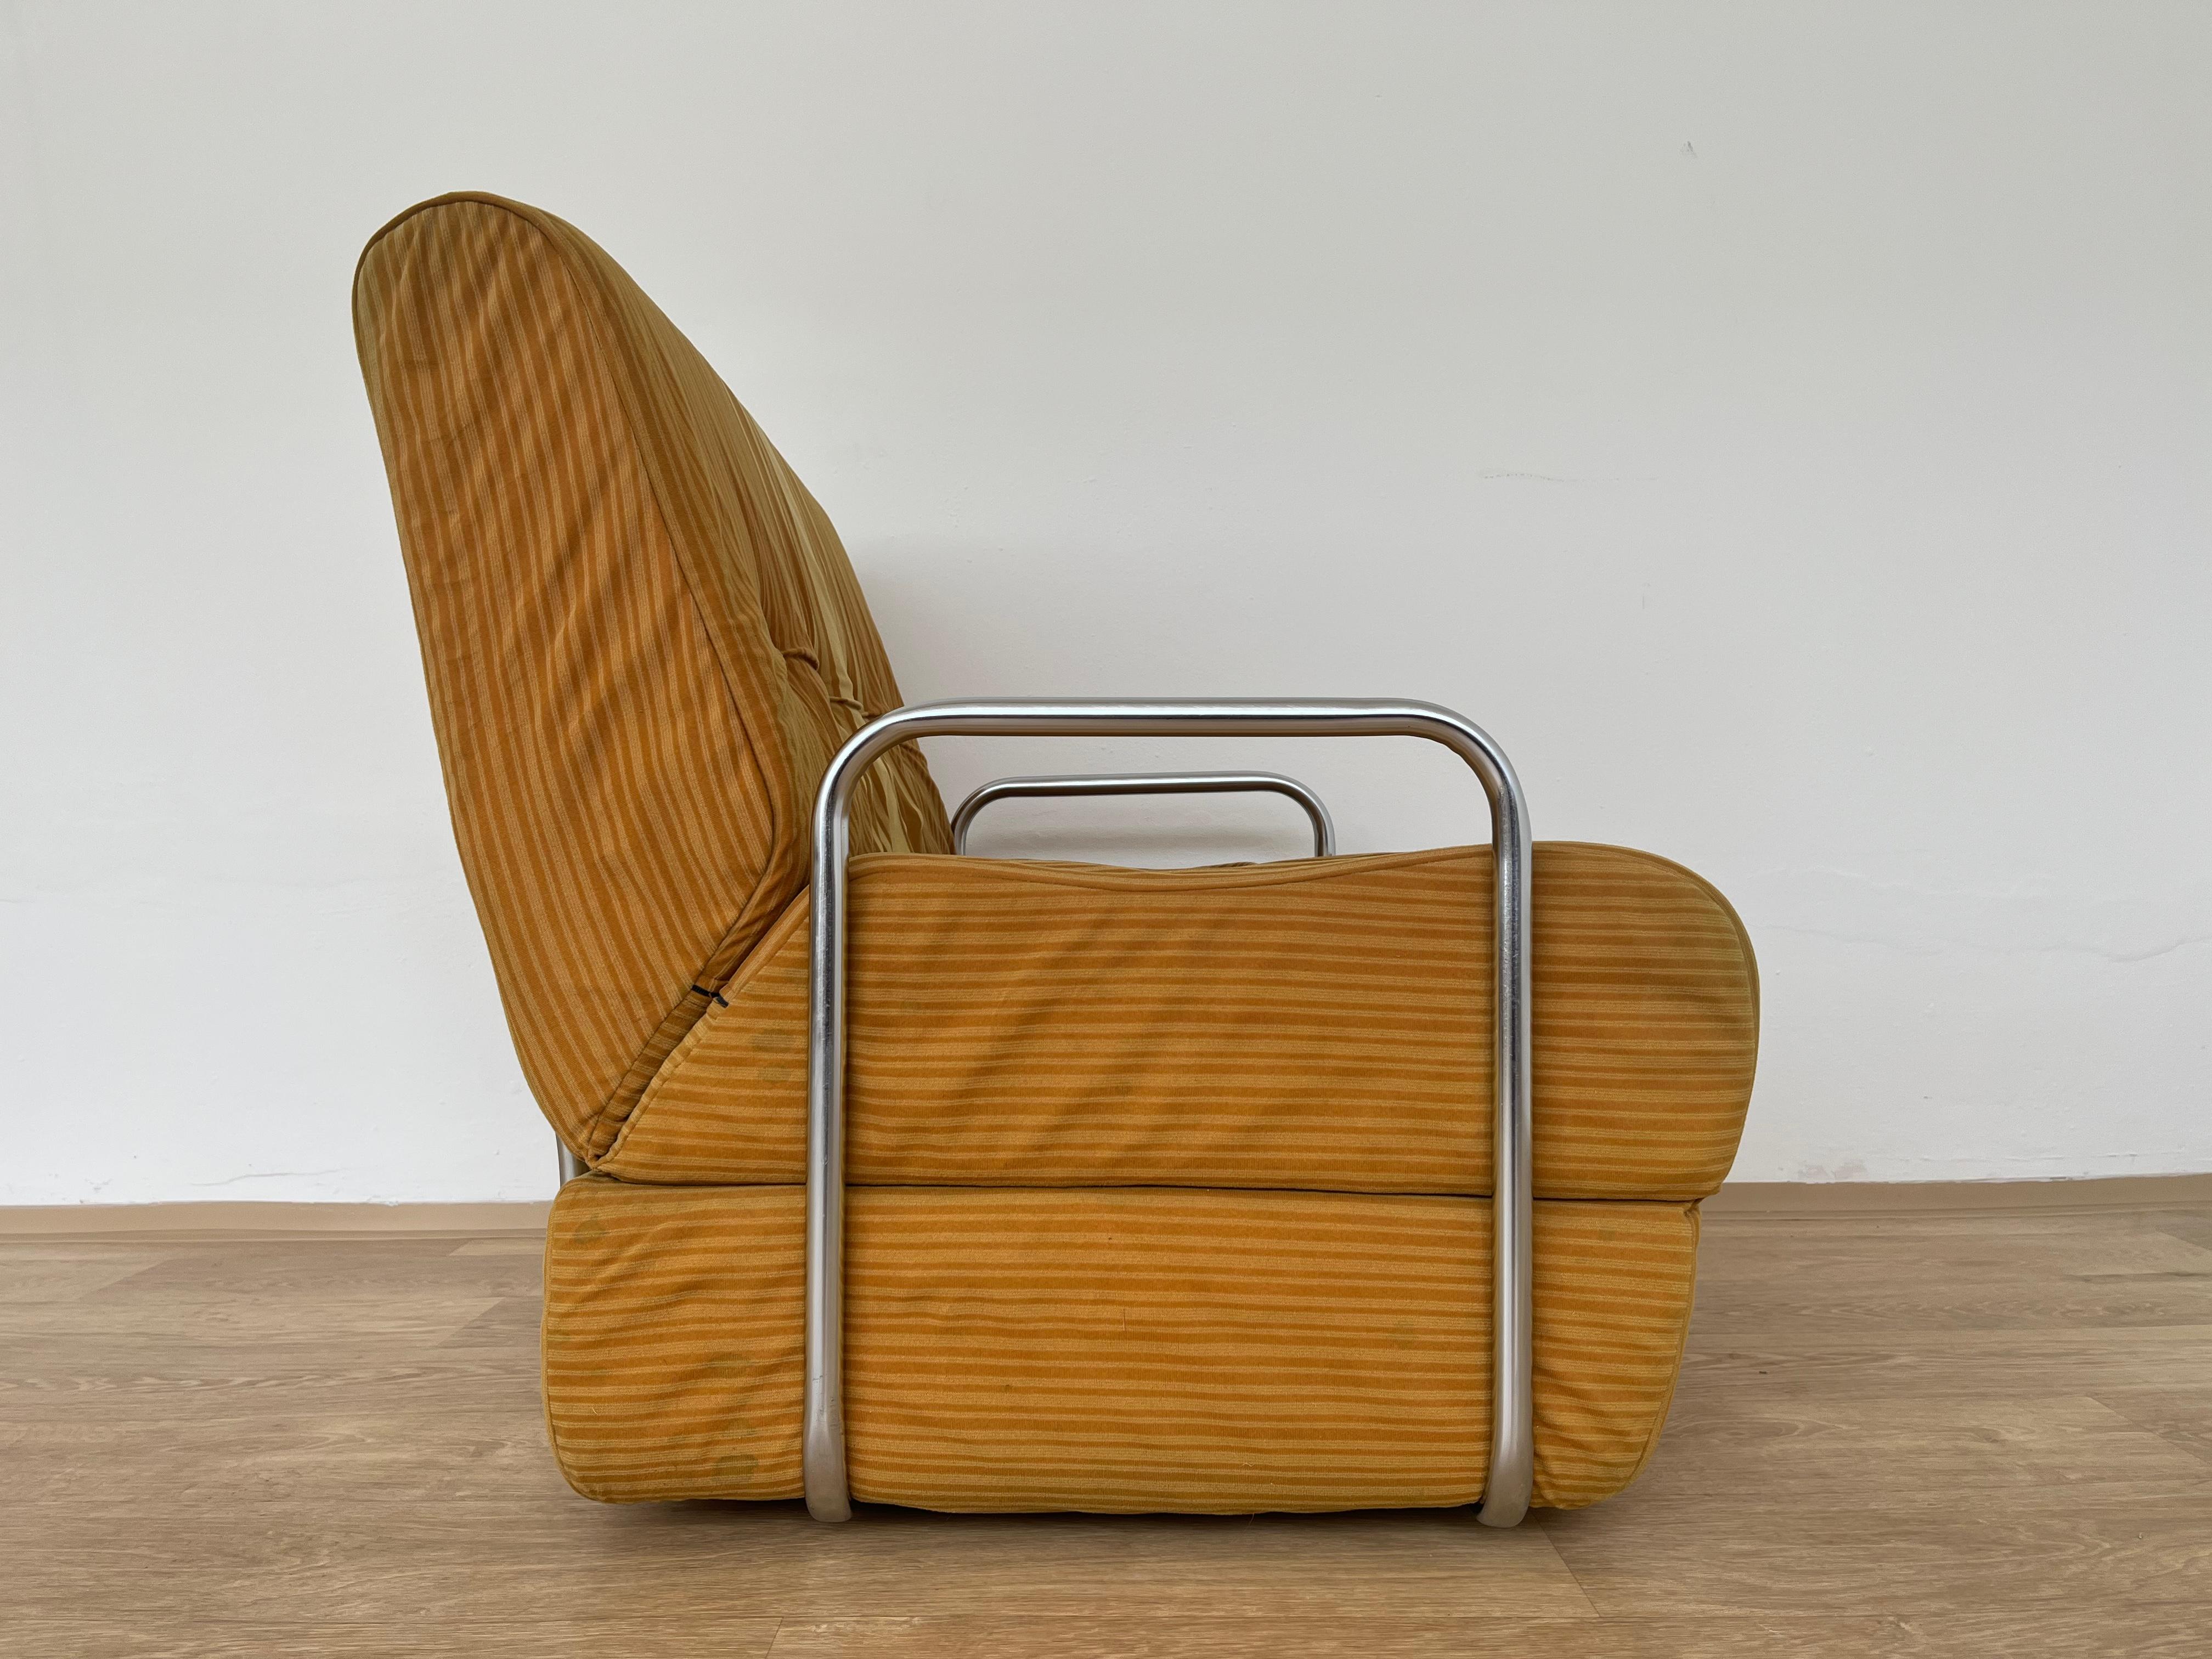 - Czechoslovakia, 1970s
- convertible to bed - lenght 188 cm, height 22 cm
- height of seat 40 cm.
RJ,sd.